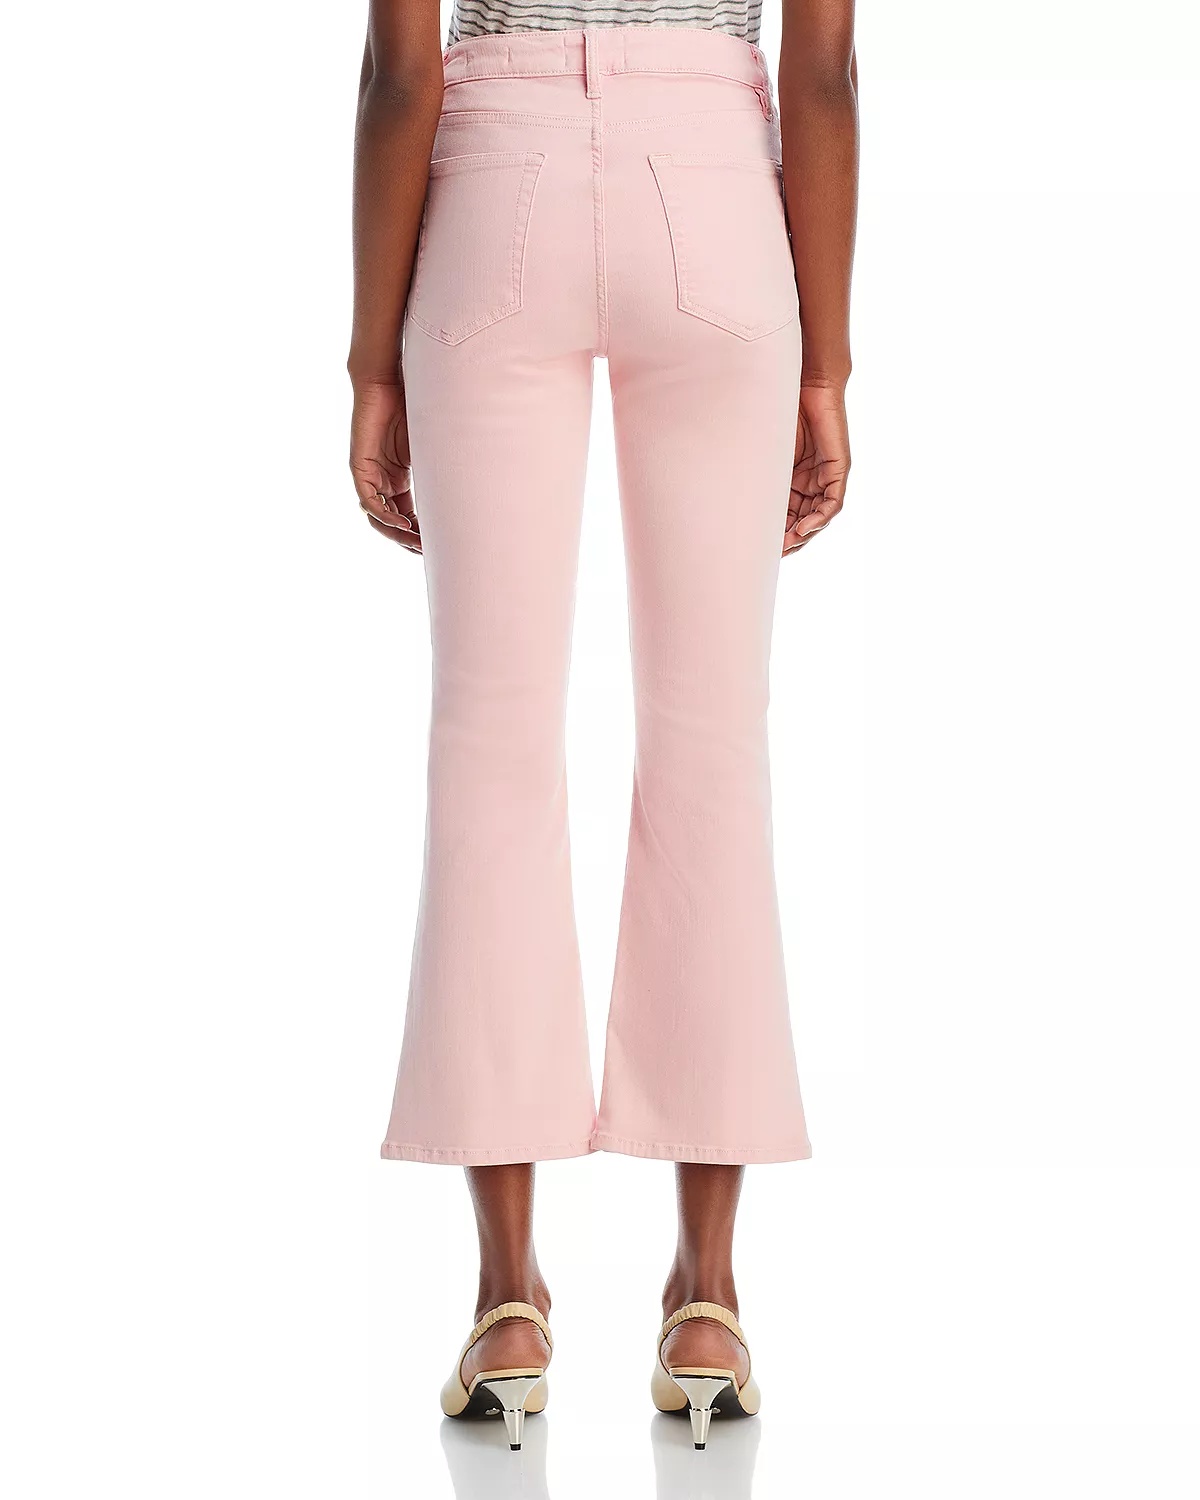 Le Crop High Rise Cropped Mini Bootcut Jeans in Washed Dusty Pink - 3